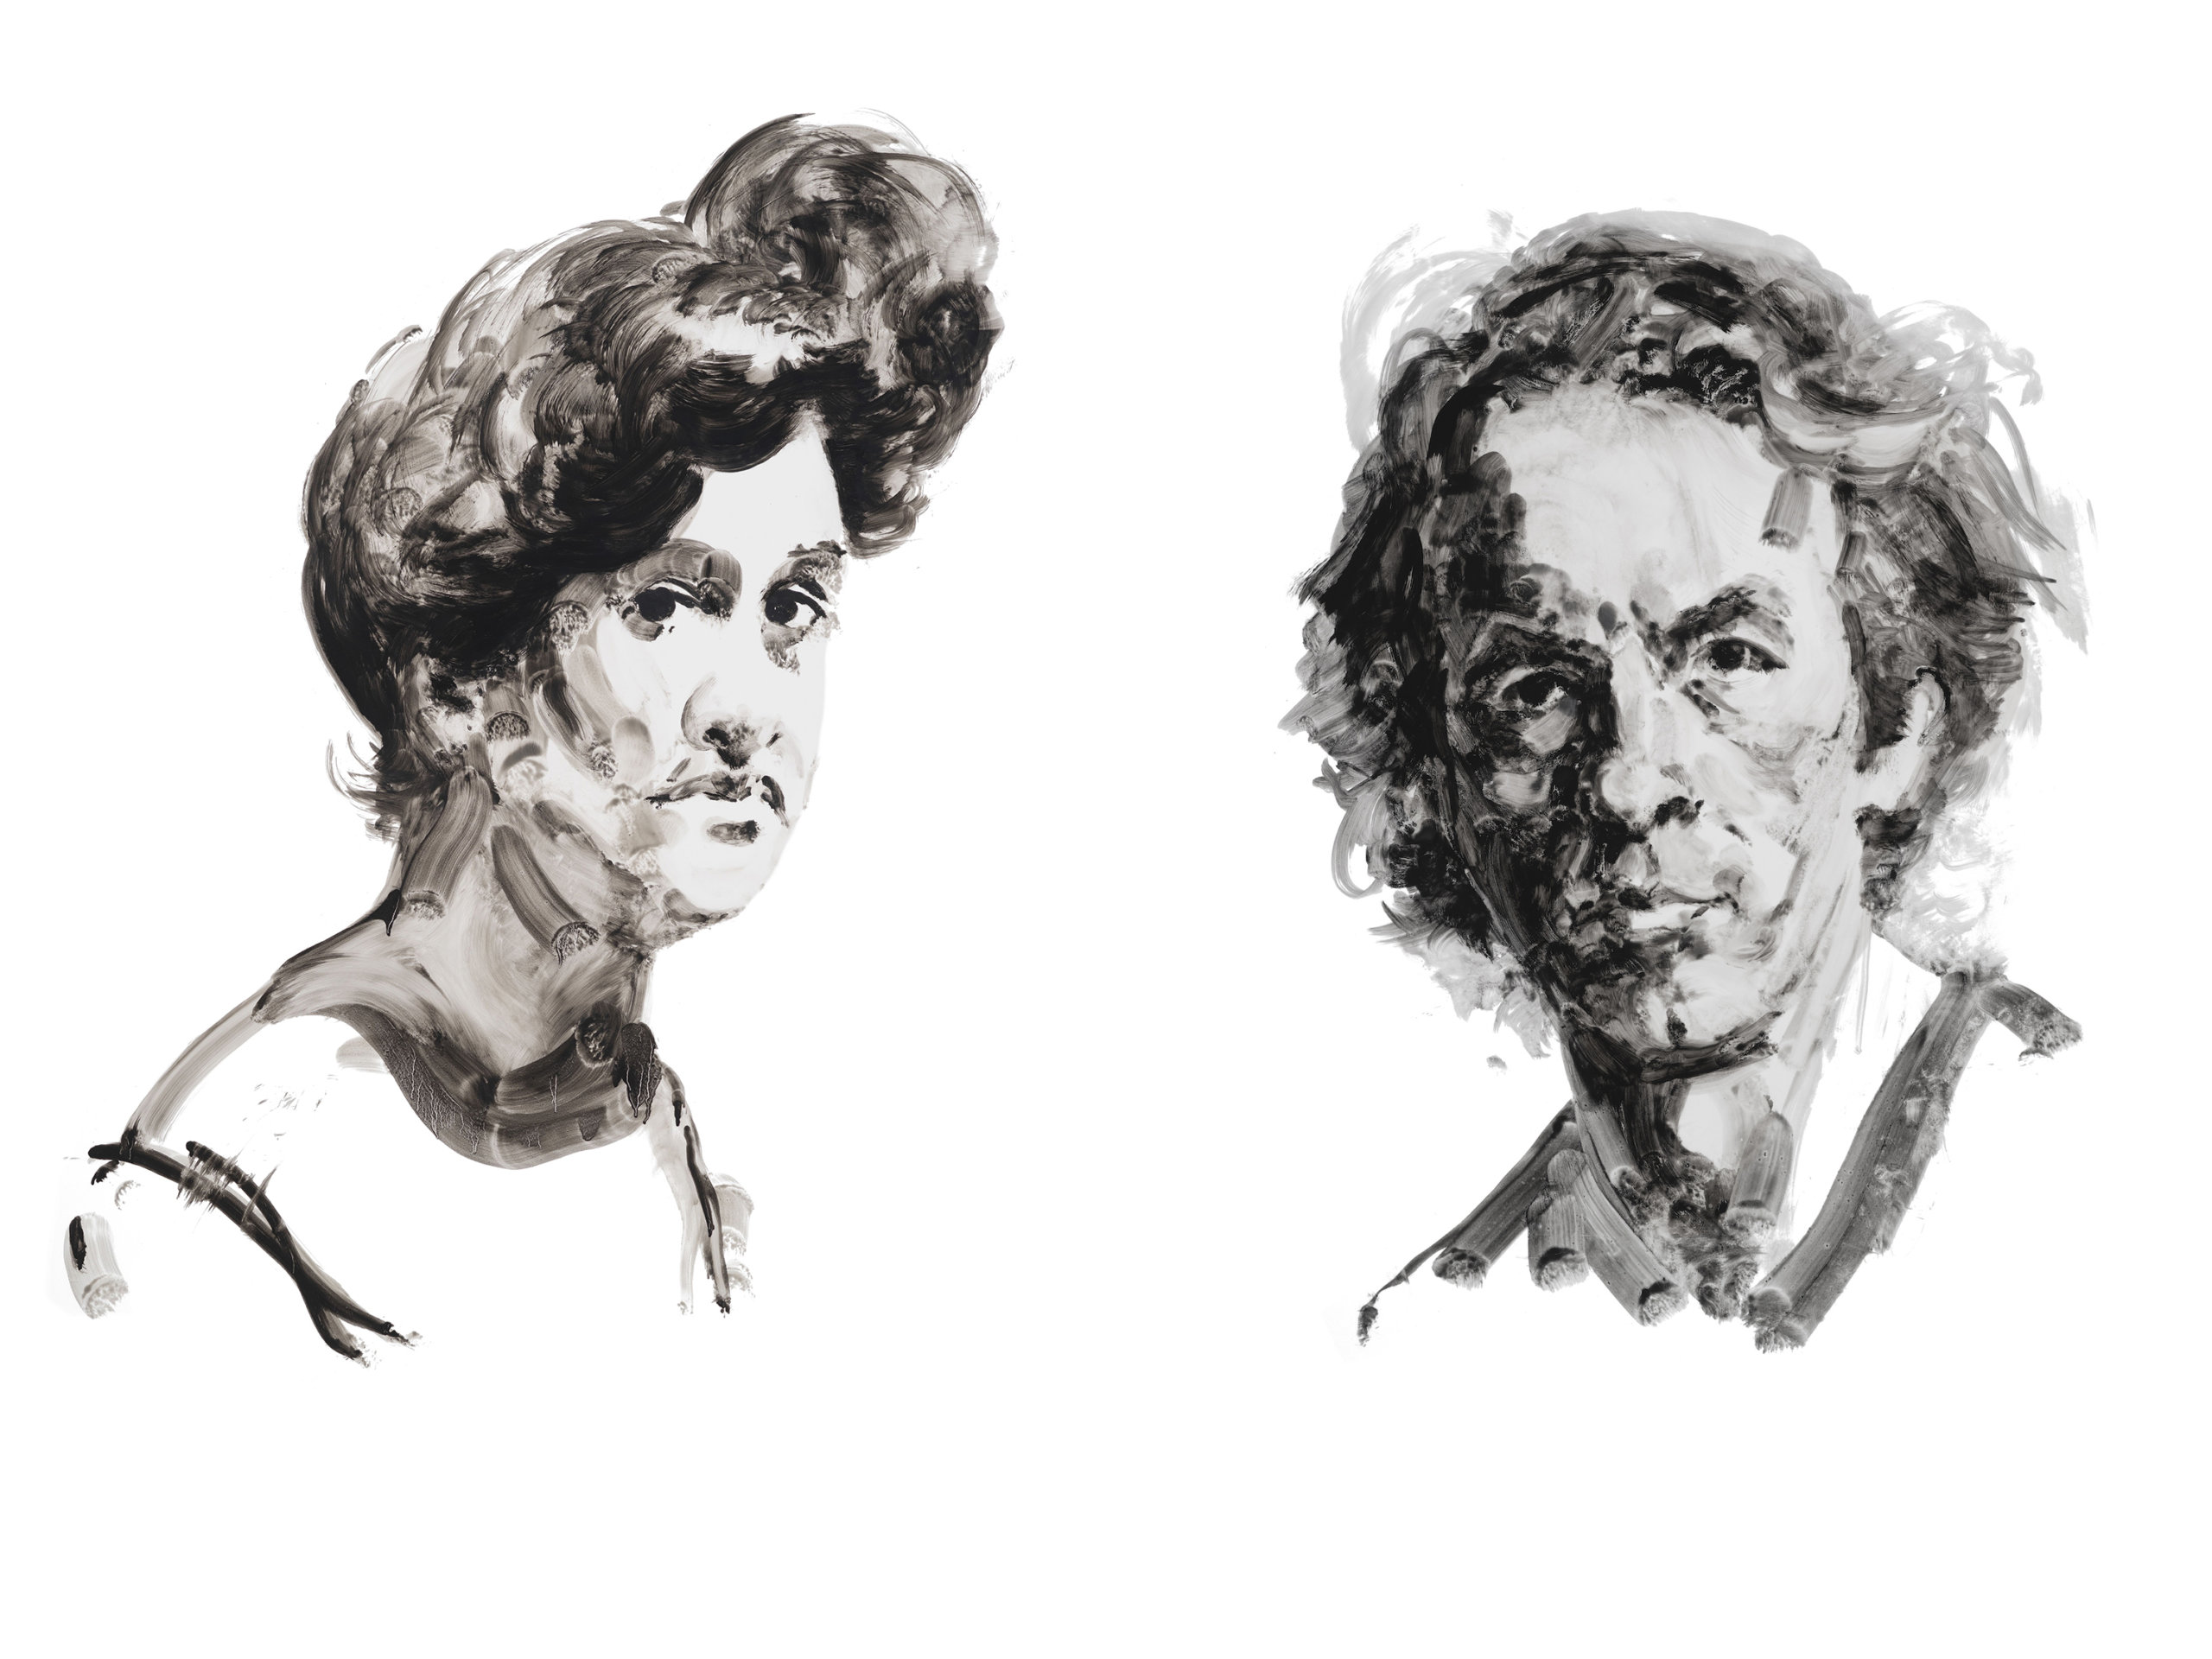 Daisy Tapley and Spalding Gray as portrayed by Eric Fischl